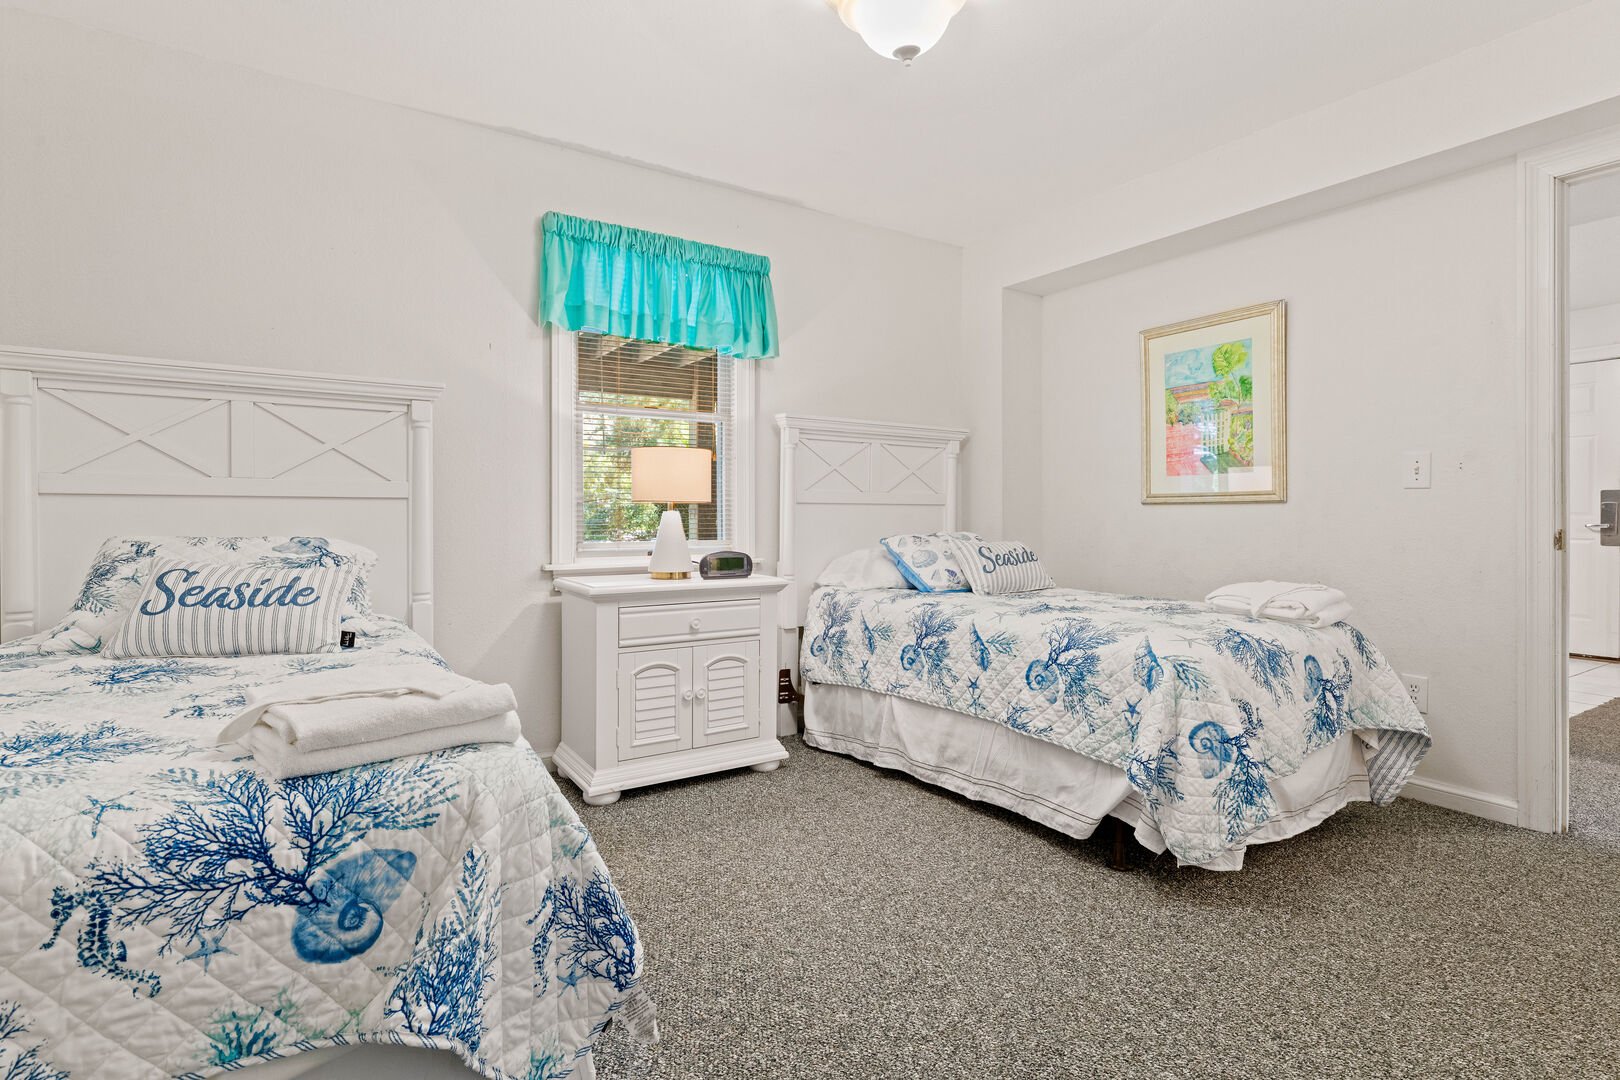 2 Twin Beds Jr. Master Suite - Ground Level